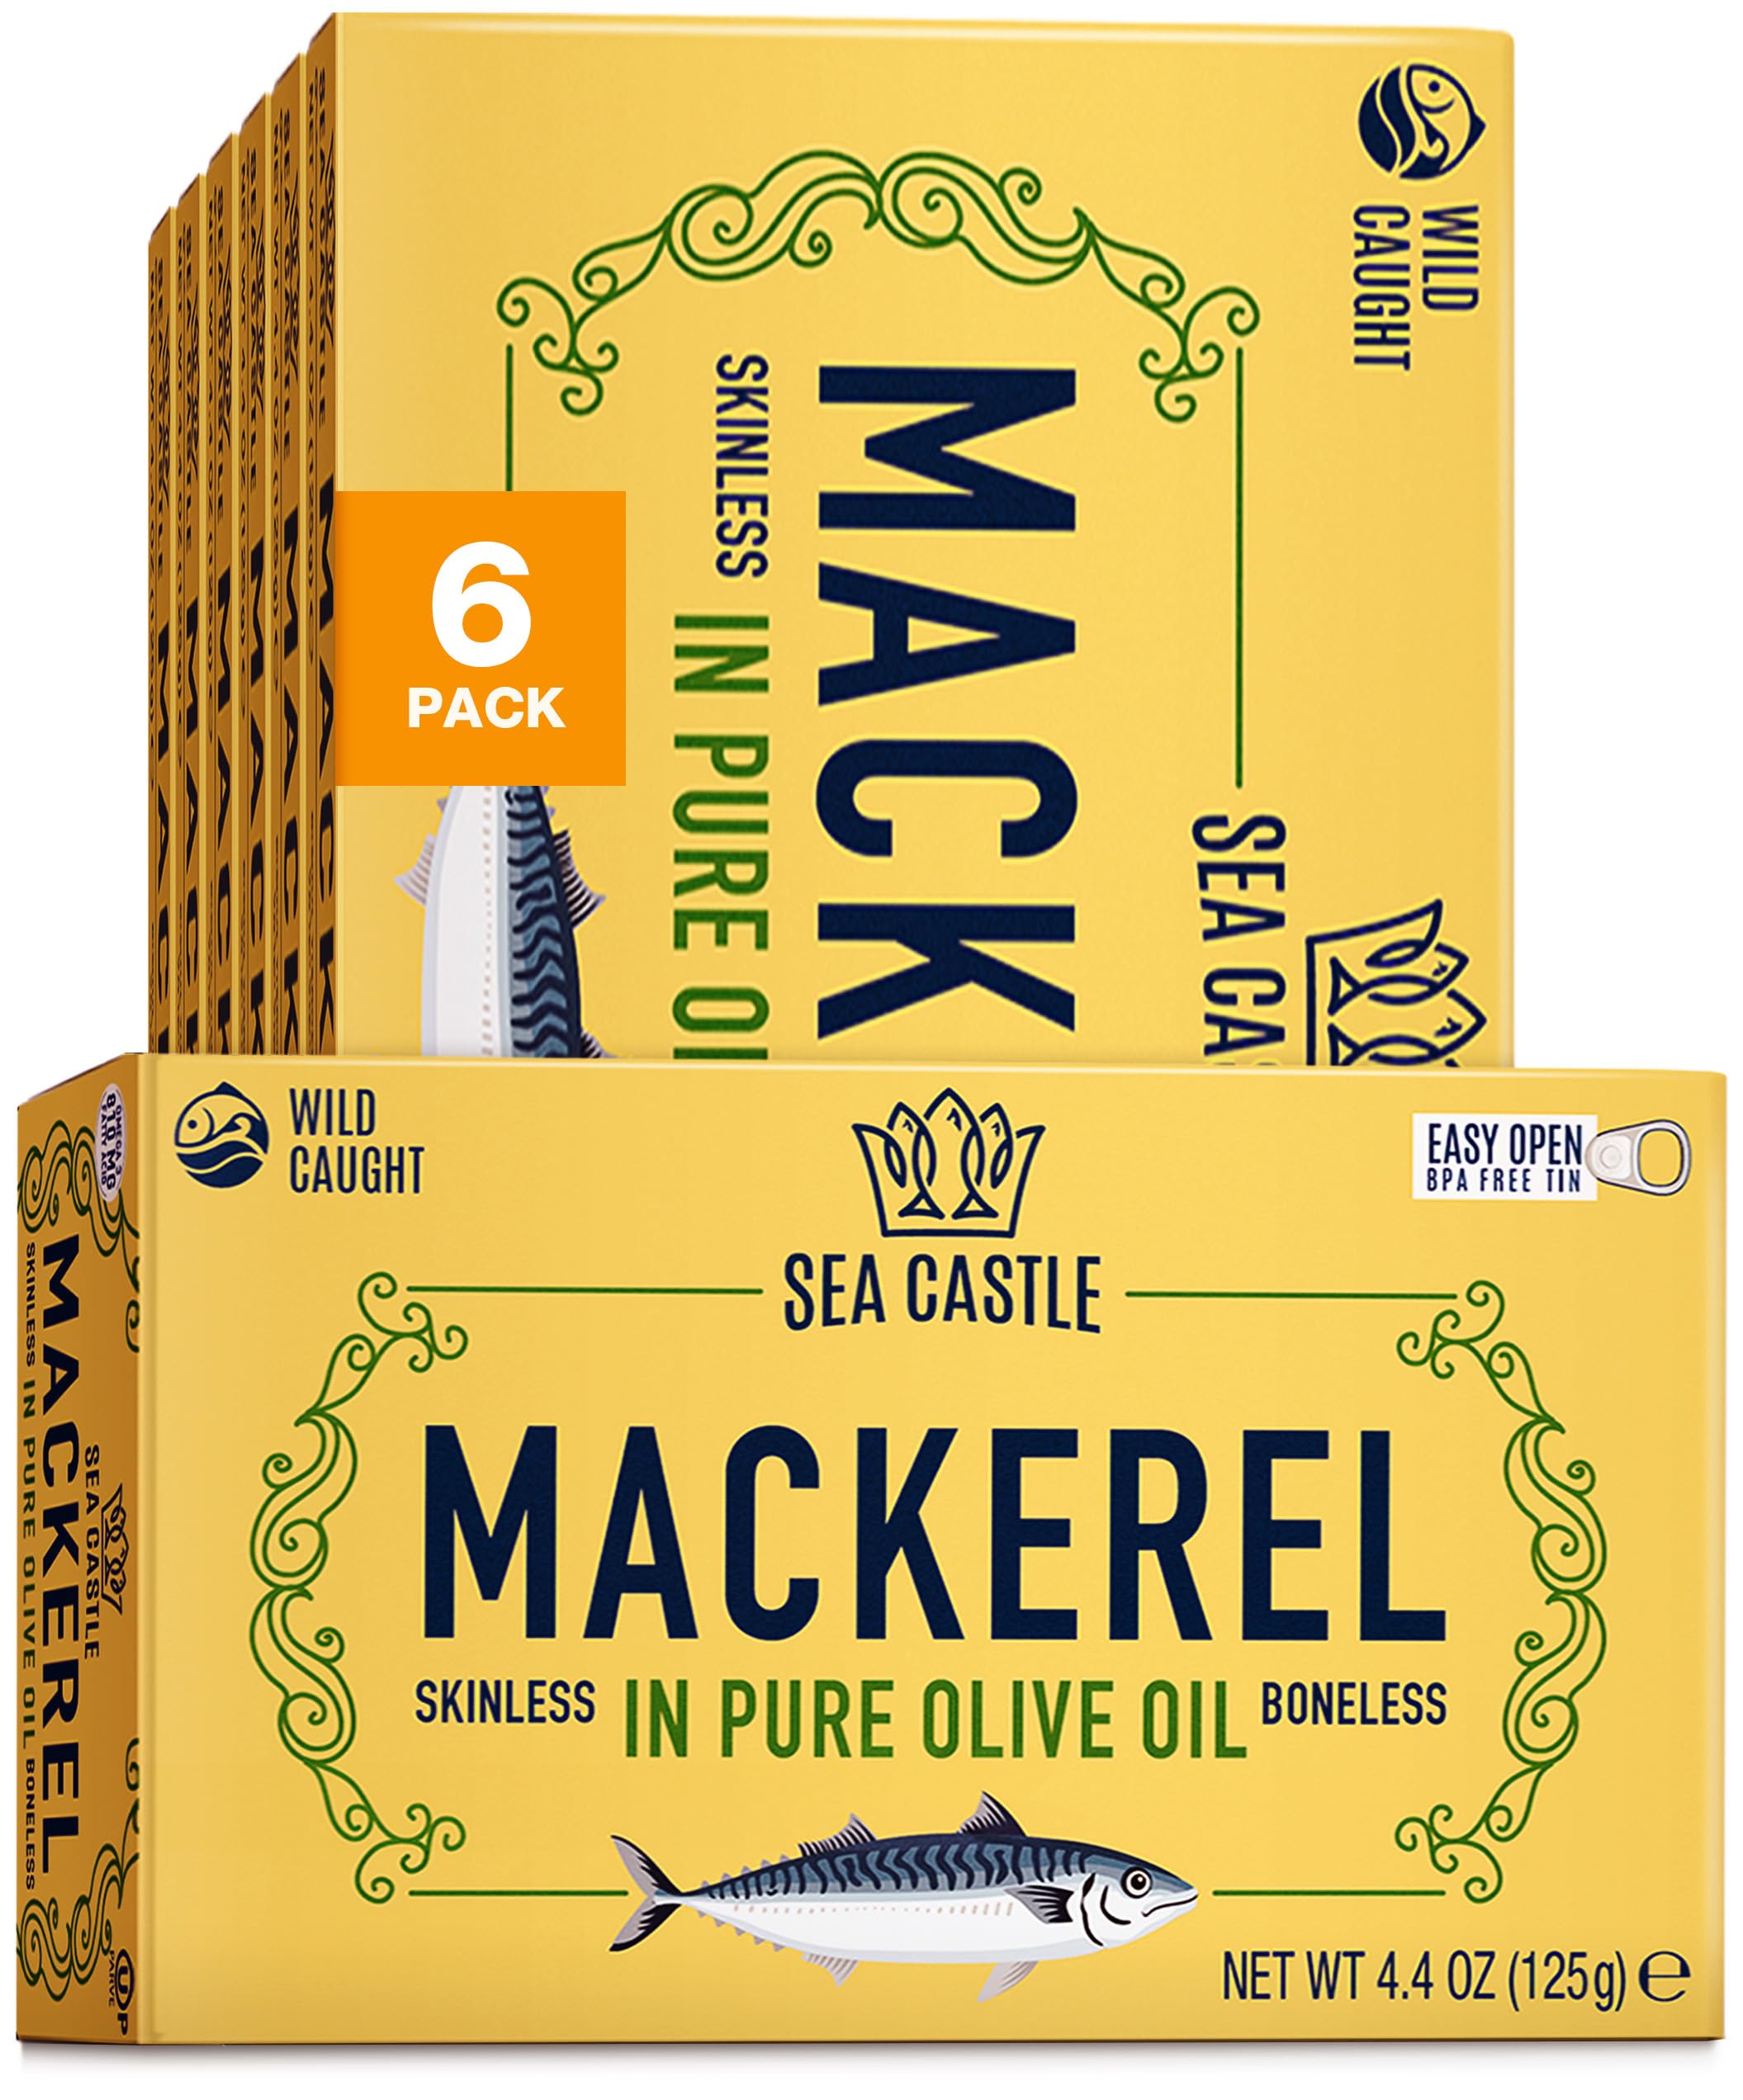 Sea Castle Mackerel in Olive Oil, 4.4oz (6 Pack) | Skinless & Boneless Canned Fish | Wild Caught Canned Mackerel Fillets | Packed with Vitamins | Non-GMO | Kosher